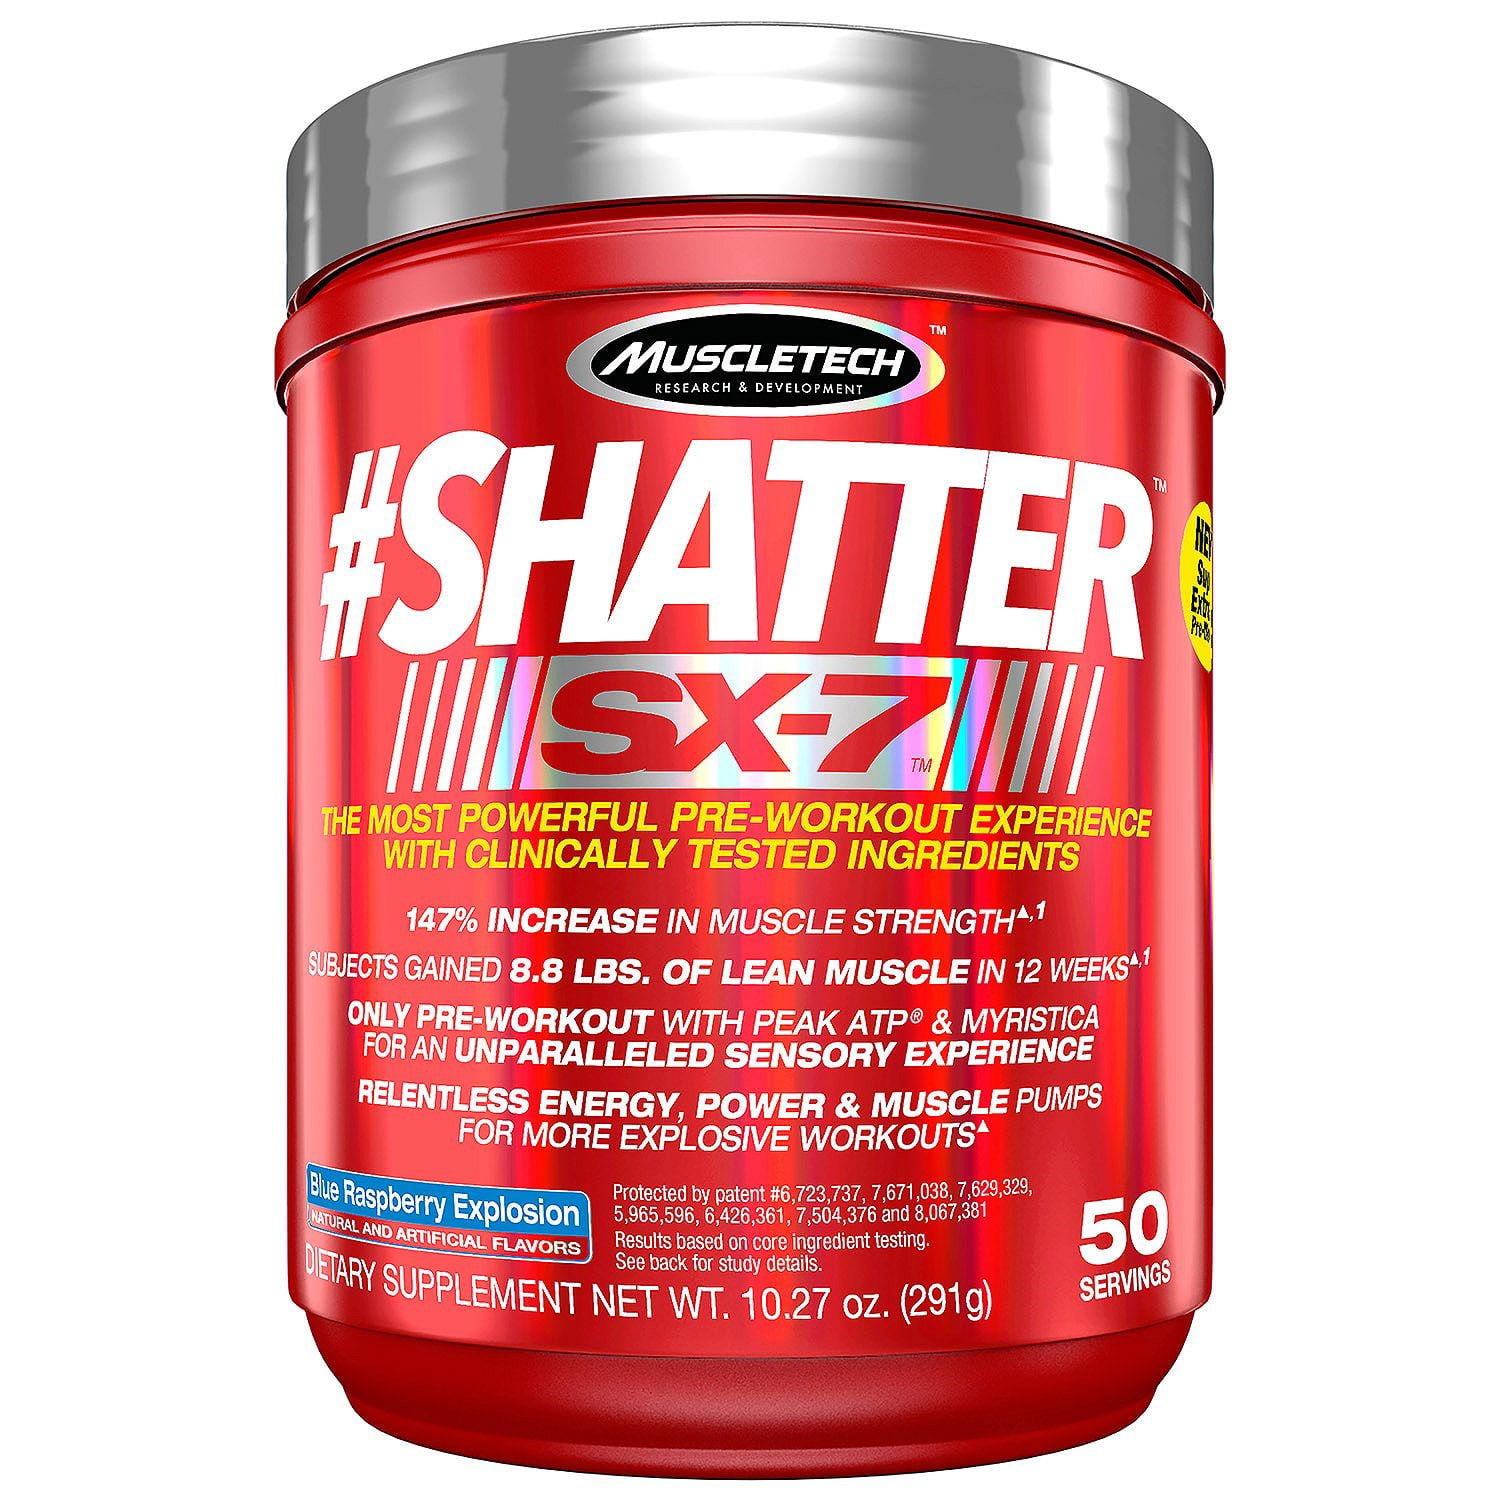  Muscletech pre workout shatter review for Fat Body